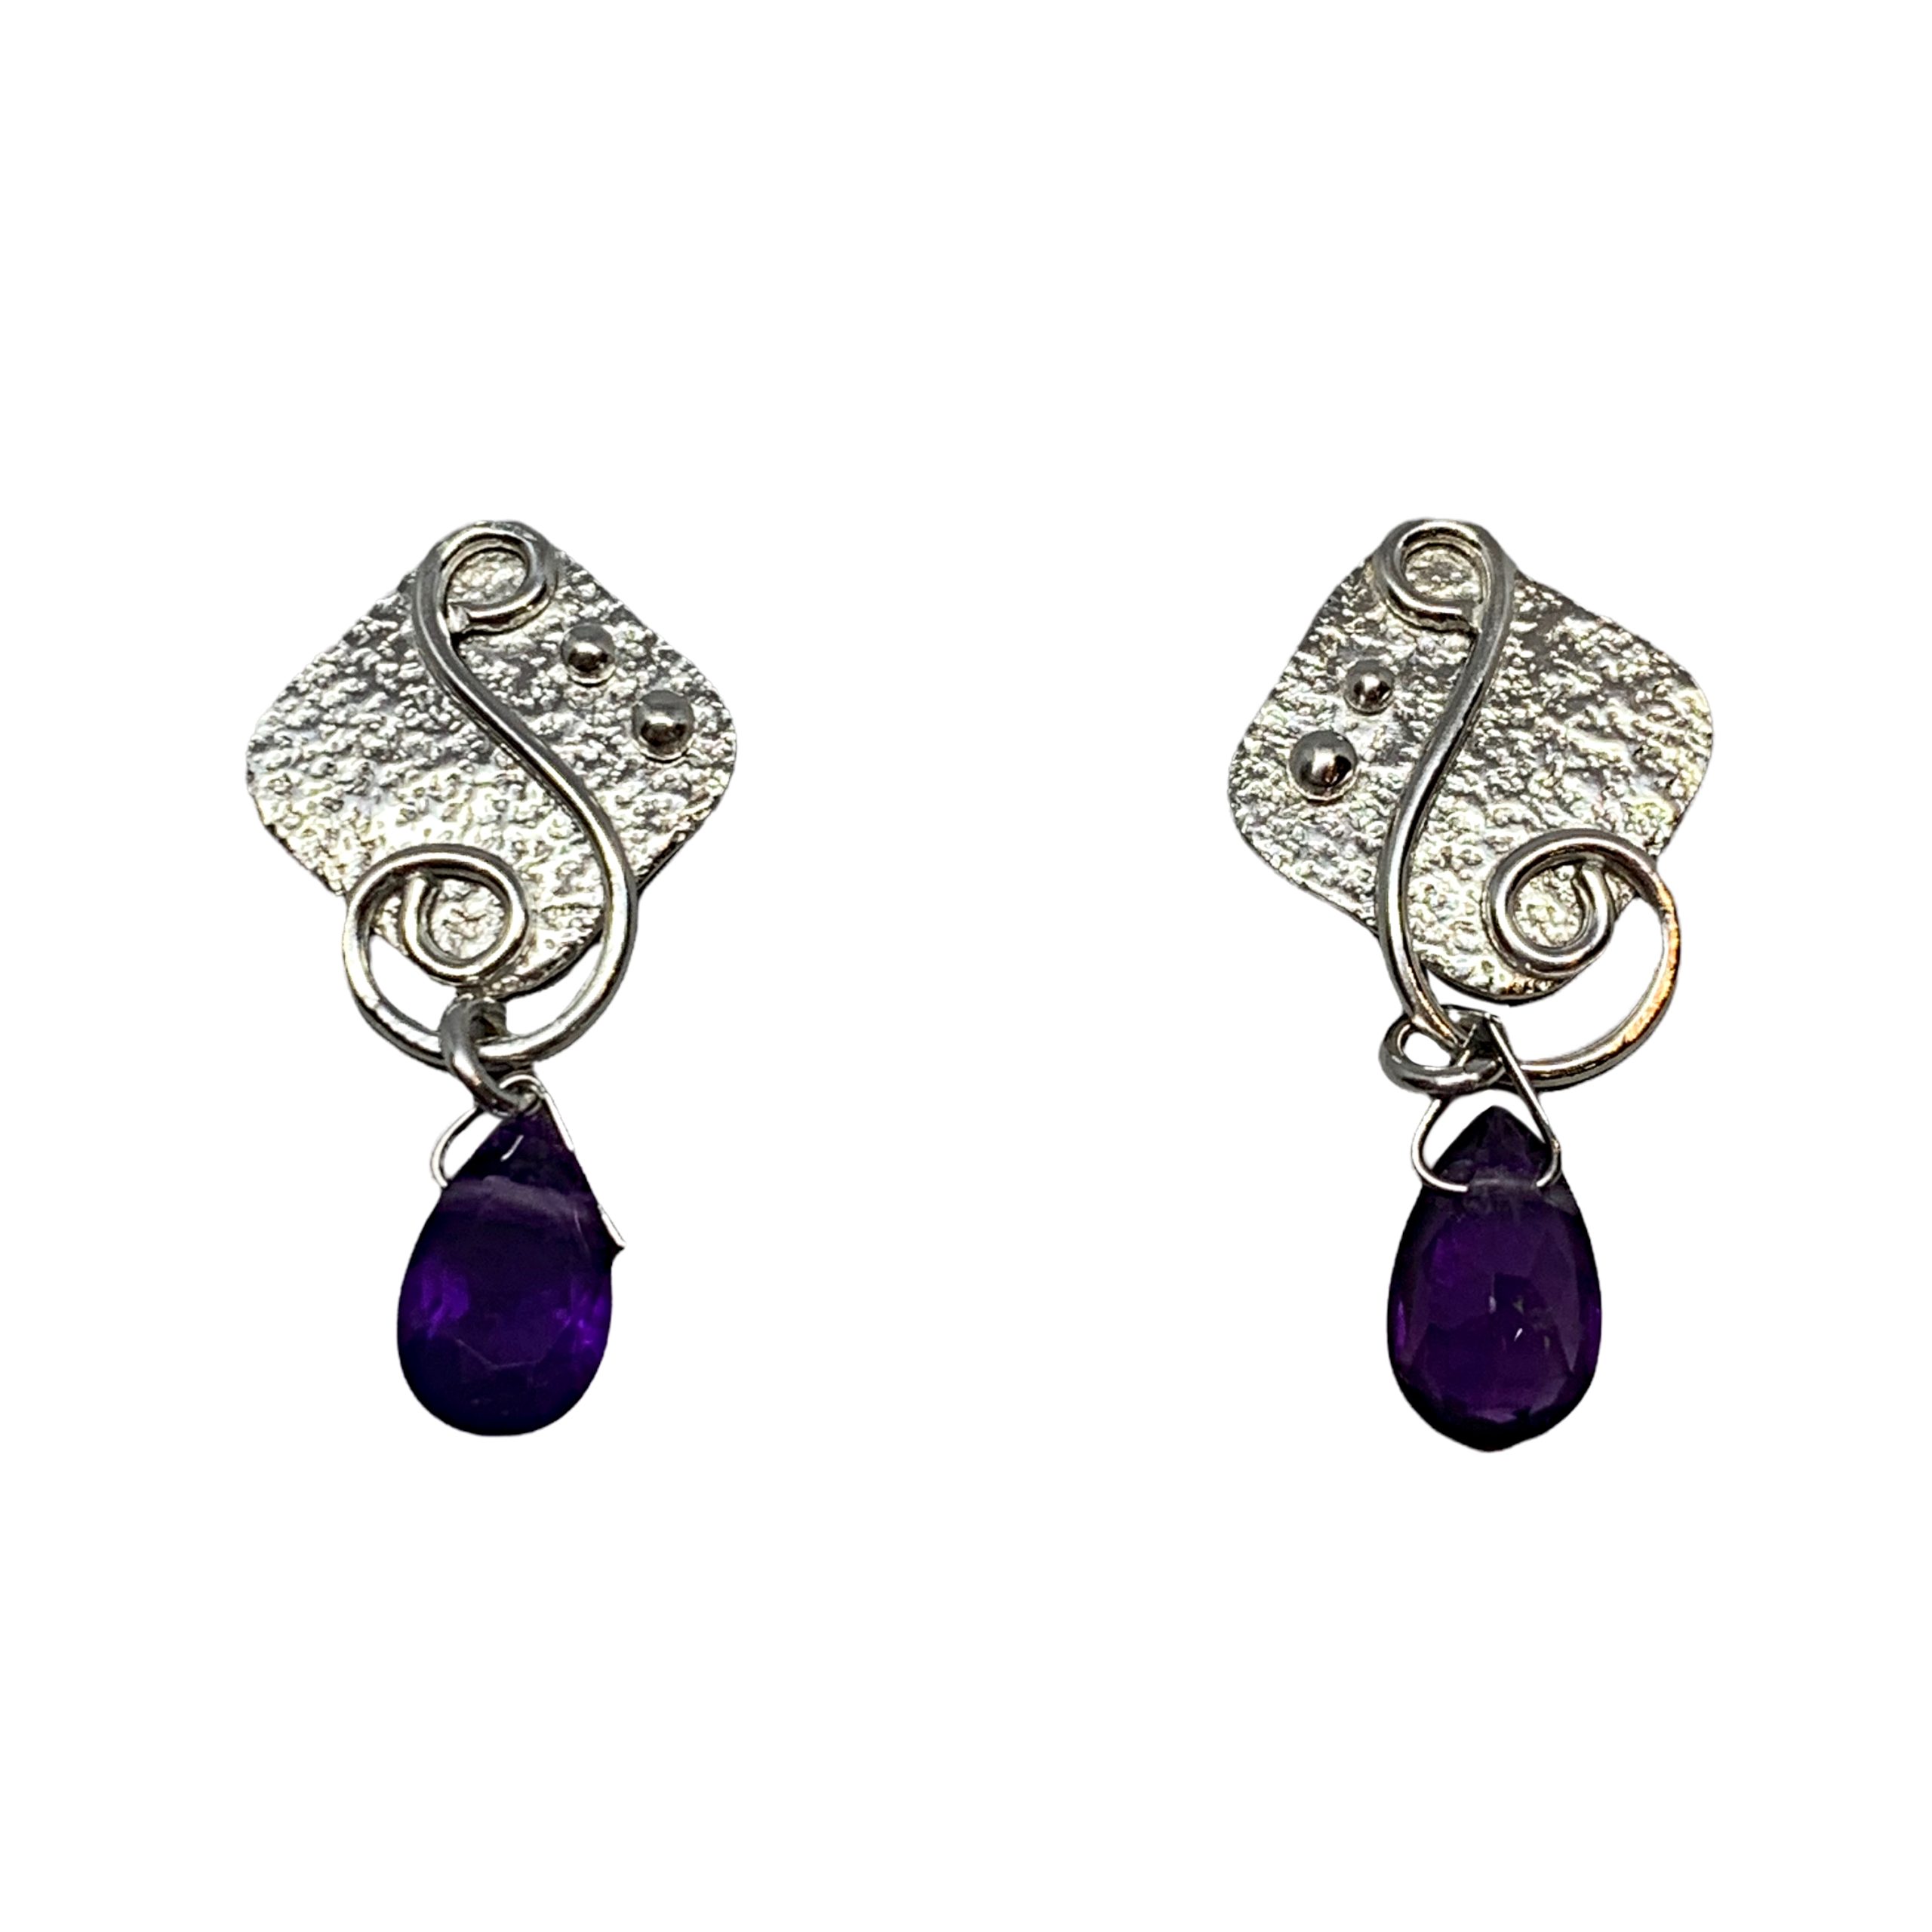 Locally handmade silver + amethyst earrings by A&R Jewellery | Effusion Art Gallery + Cast Glass Studio, Invermere BC